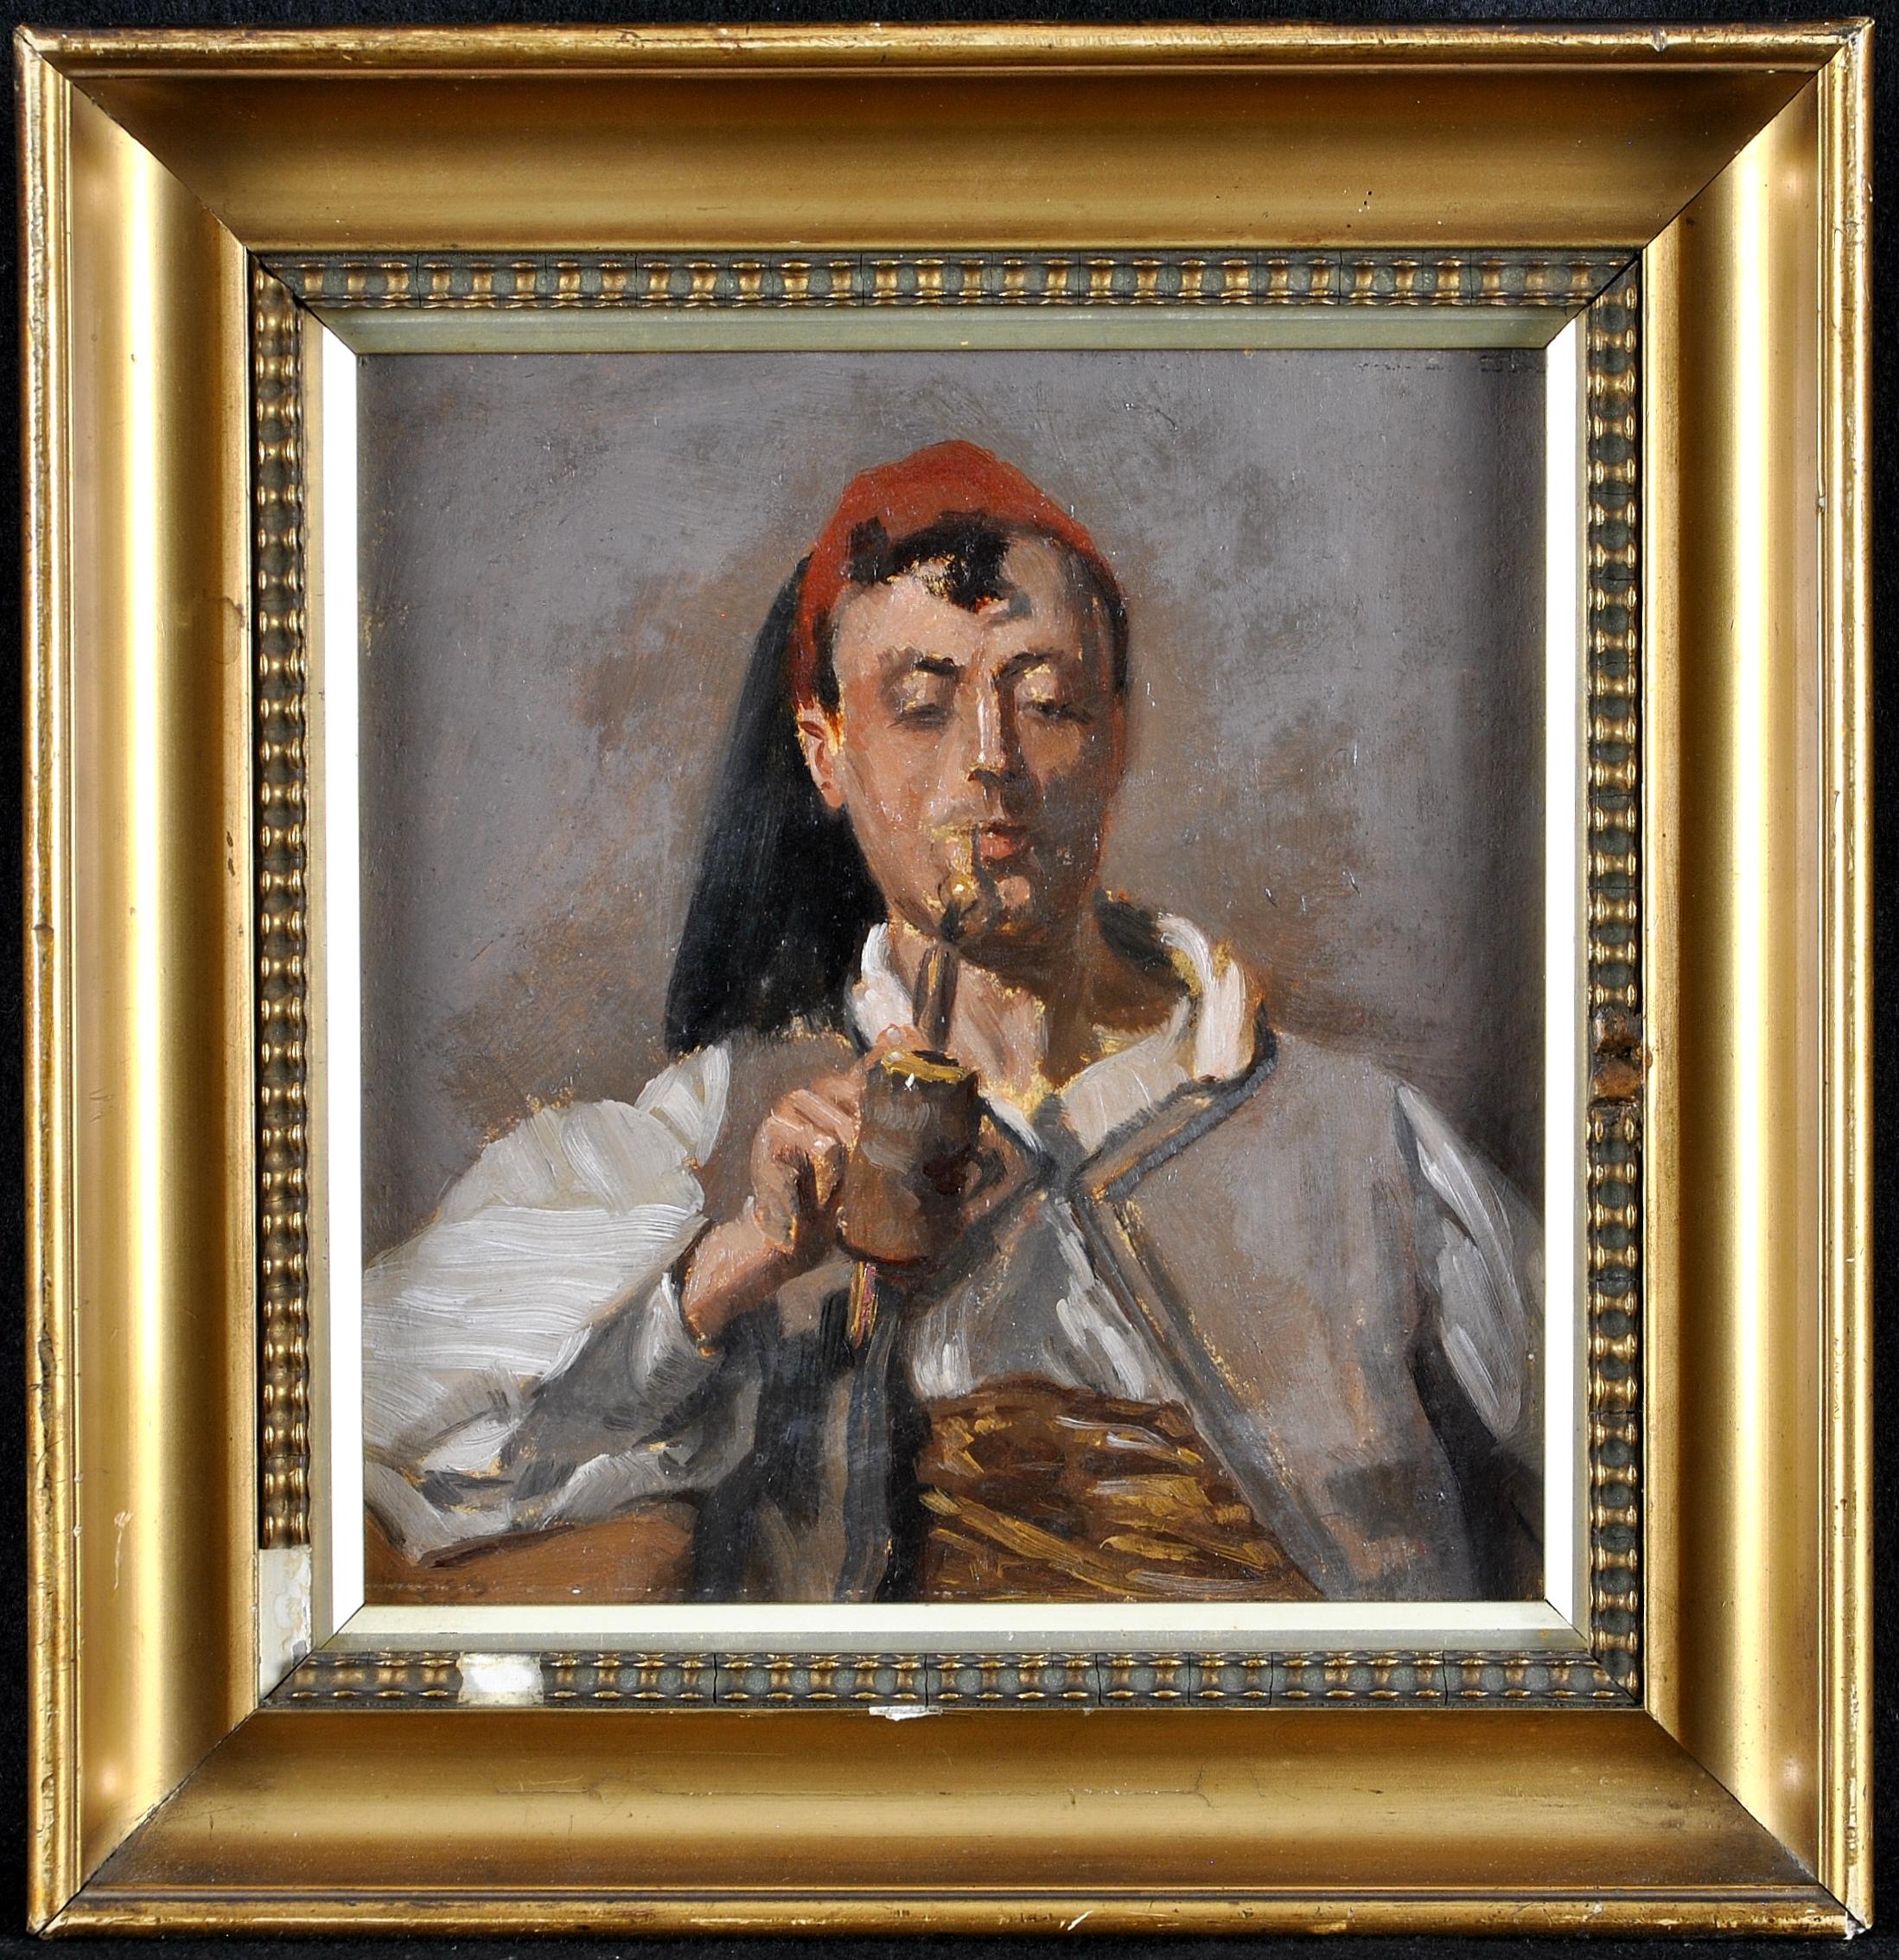 This late 19th or early 20th century oil on board depicts a North African man smoking a large pipe. A very well executed small scale work which is presented in it's original gilt wood frame.

Artist: British School, 19th/20th century
Title: North